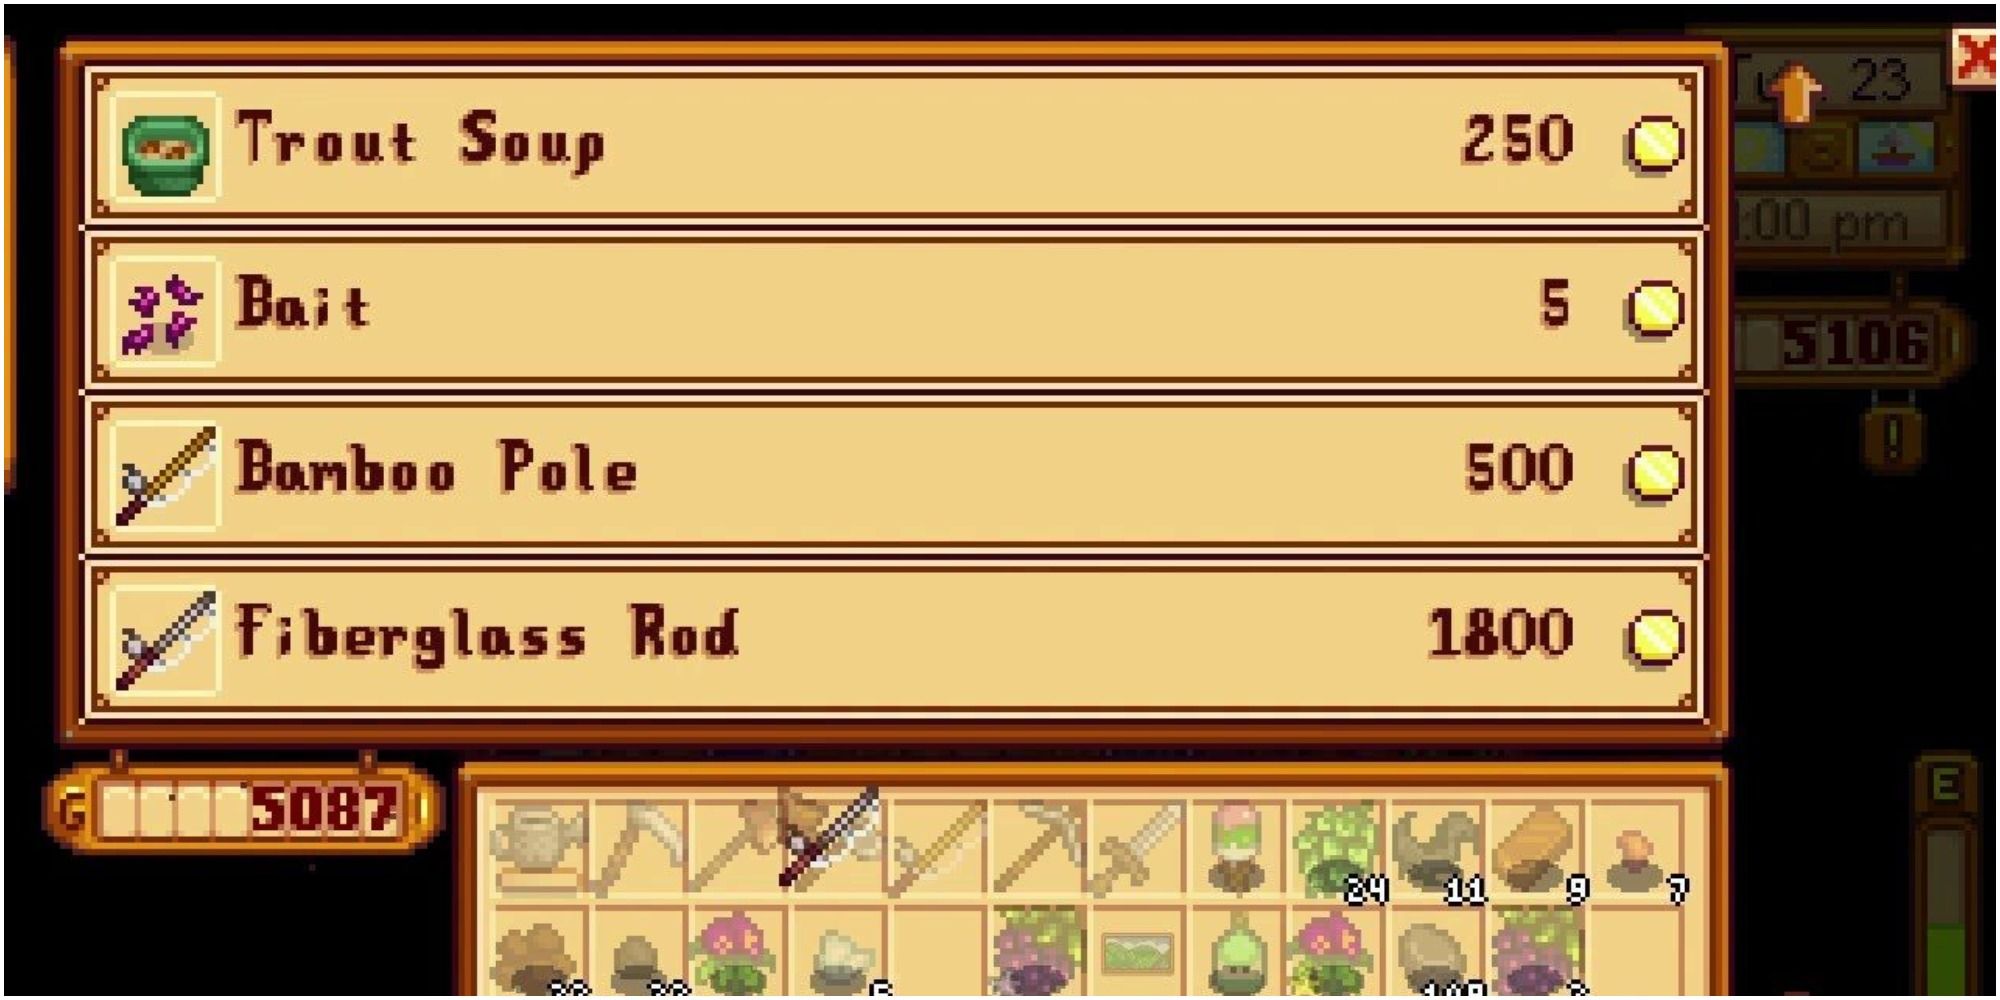 Trout Soup stardew valley 